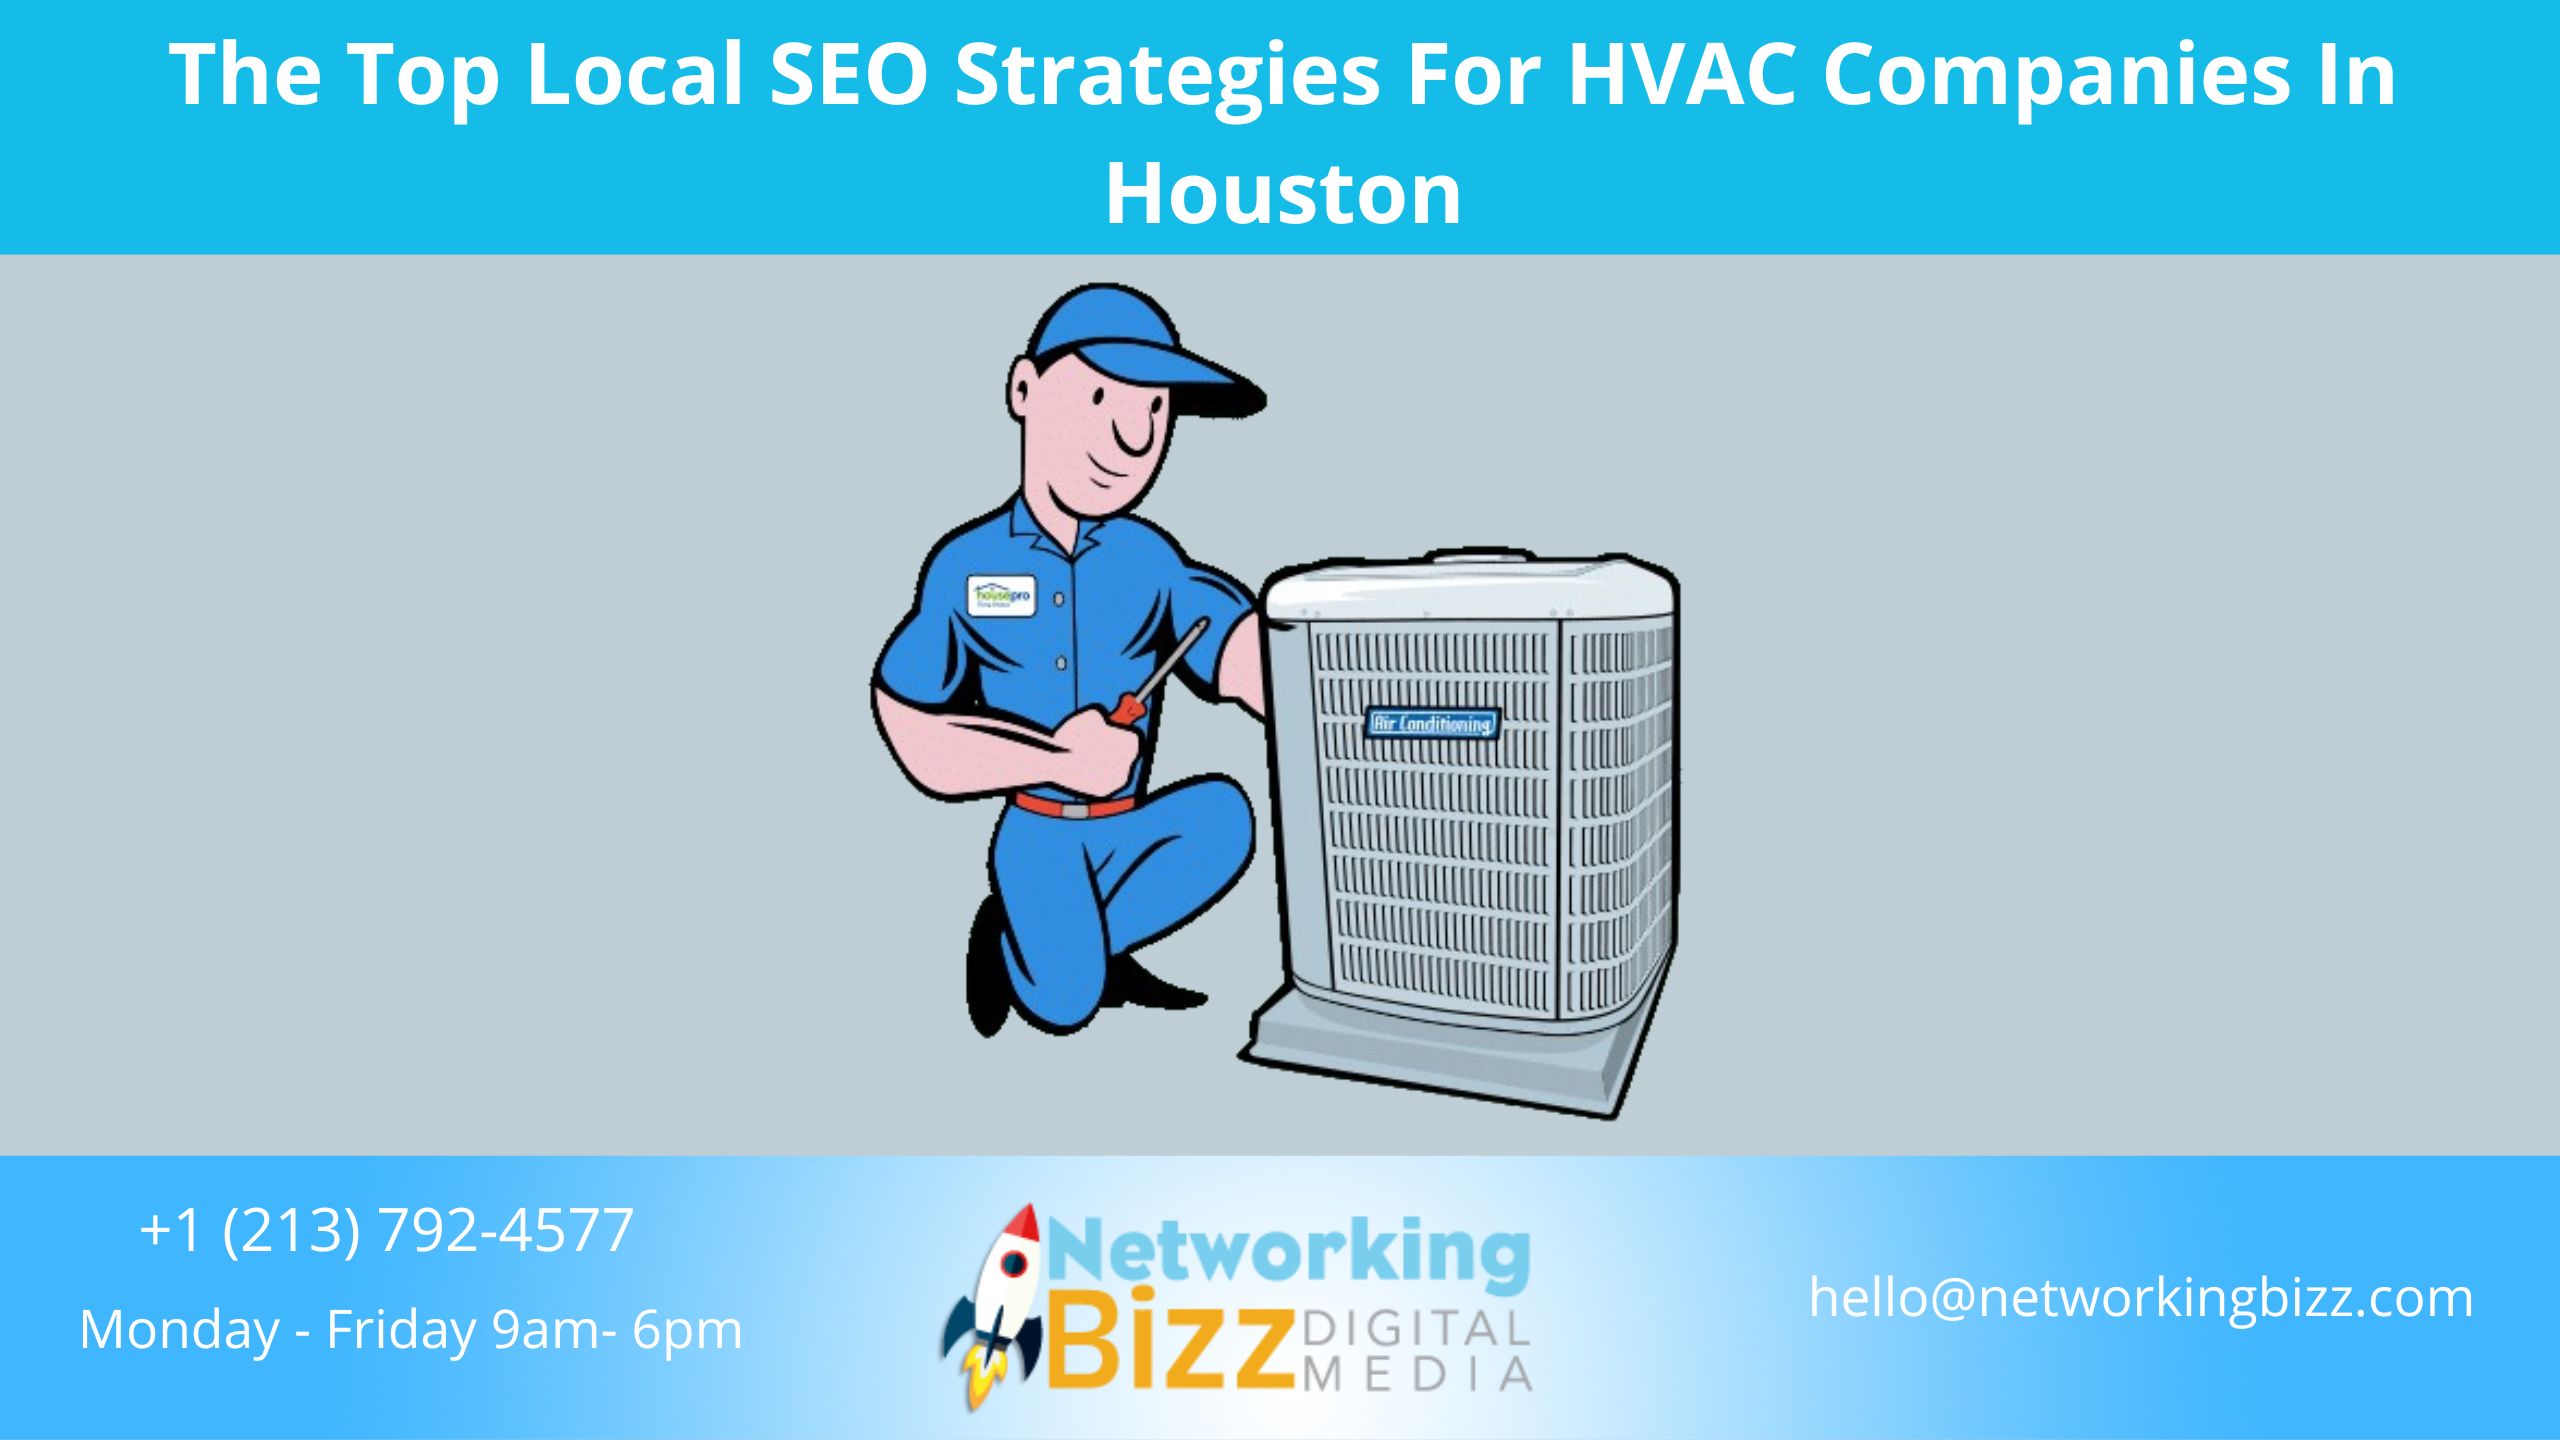 The Top Local SEO Strategies For HVAC Companies In Houston 